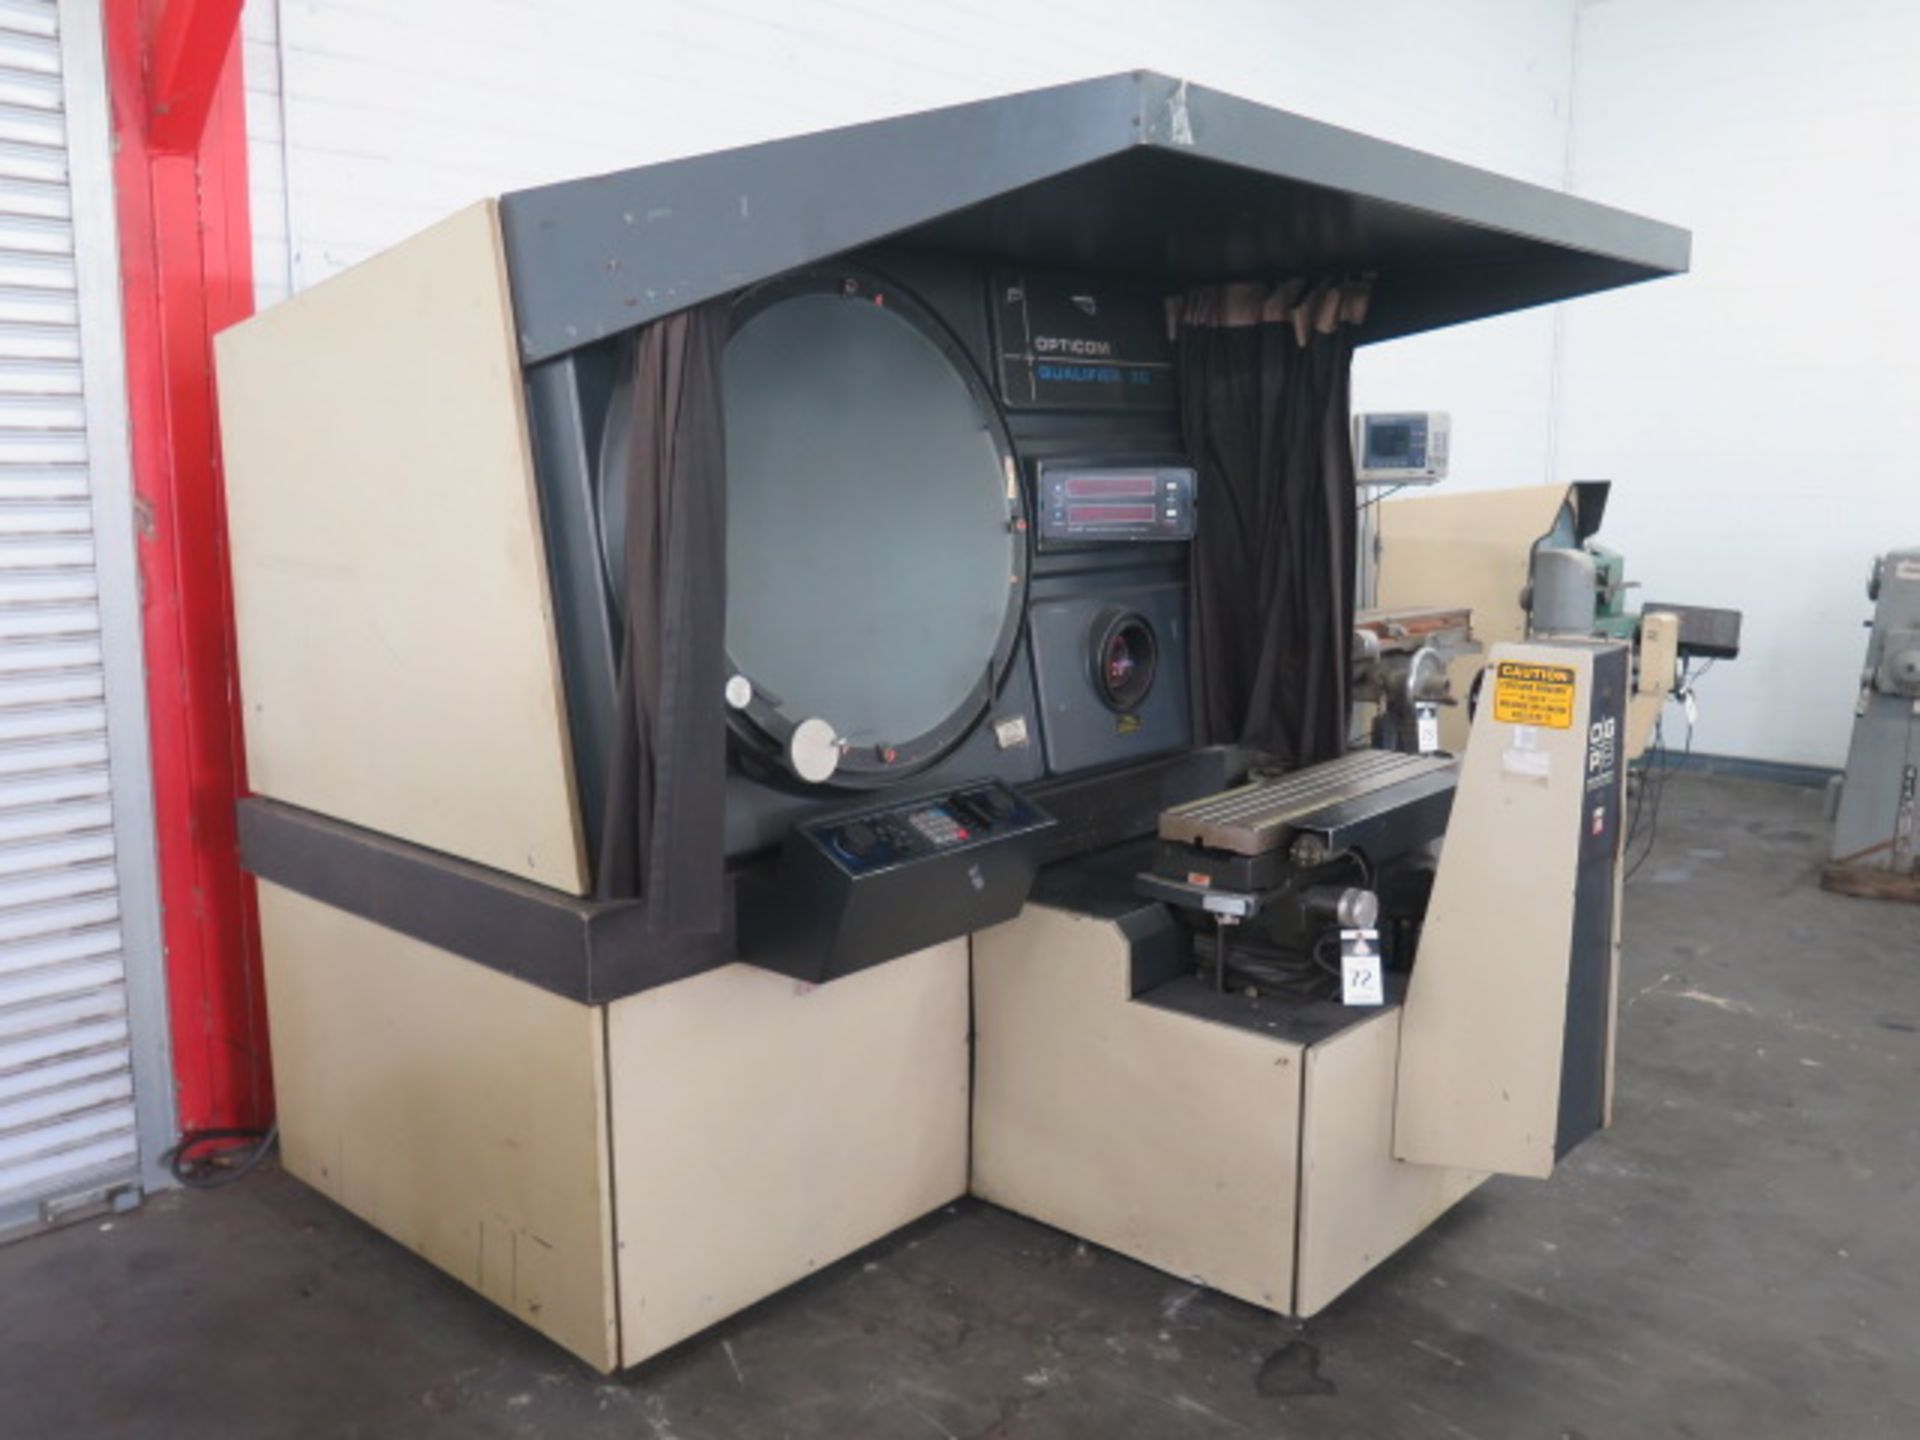 OGP Optical Gaging Co. “Opticon Qualifier 30” mdl. 0030S 30” Optical Comparator s/n 00300-340 w/ - Image 2 of 13